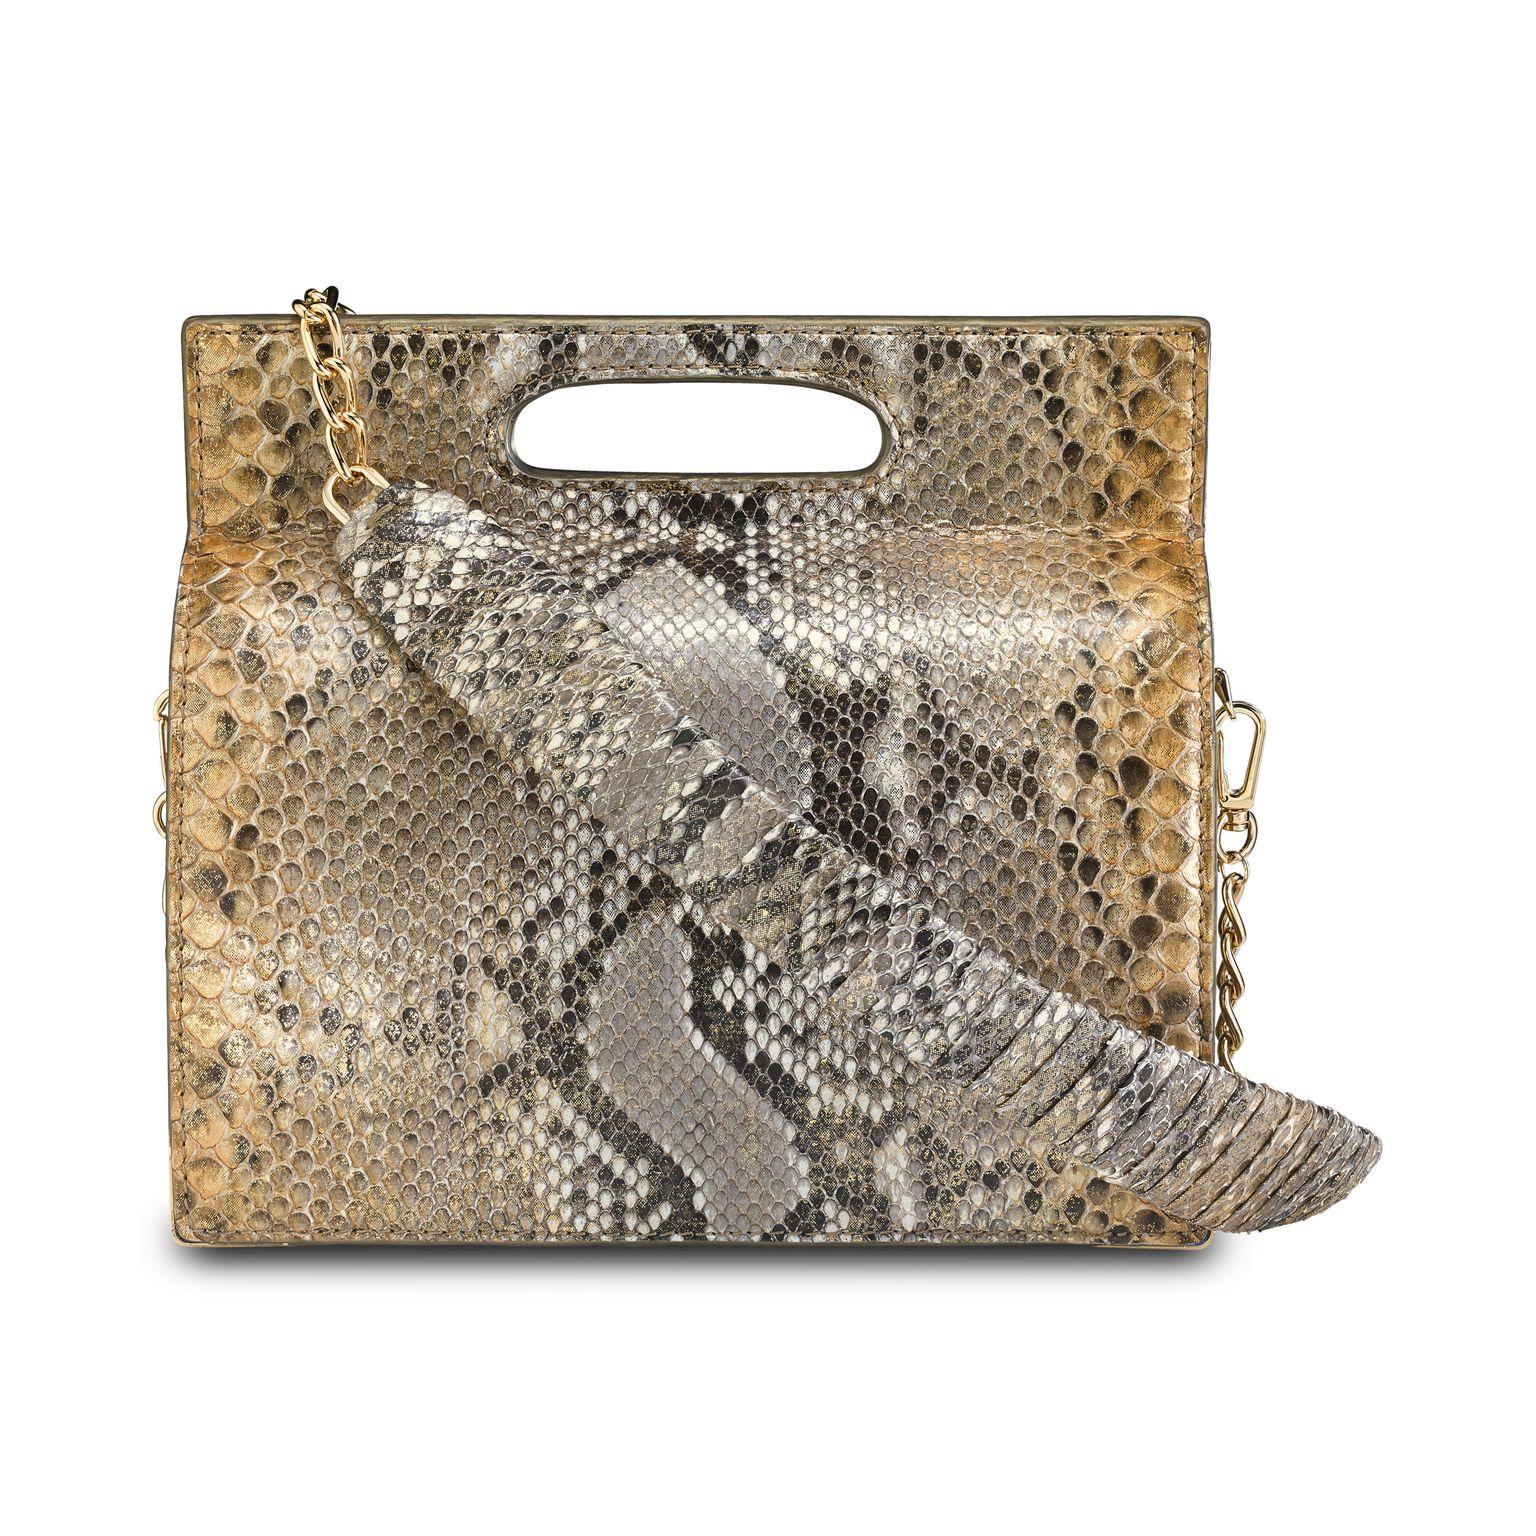 The Stella Handbag Tall is featured in Metallic Gold Natural Python with gold hardware. The structured handbag has a magnetic closure and an optional cross-body chain with a python-wrapped accent. It fits the large iPhone, has custom exterior metal